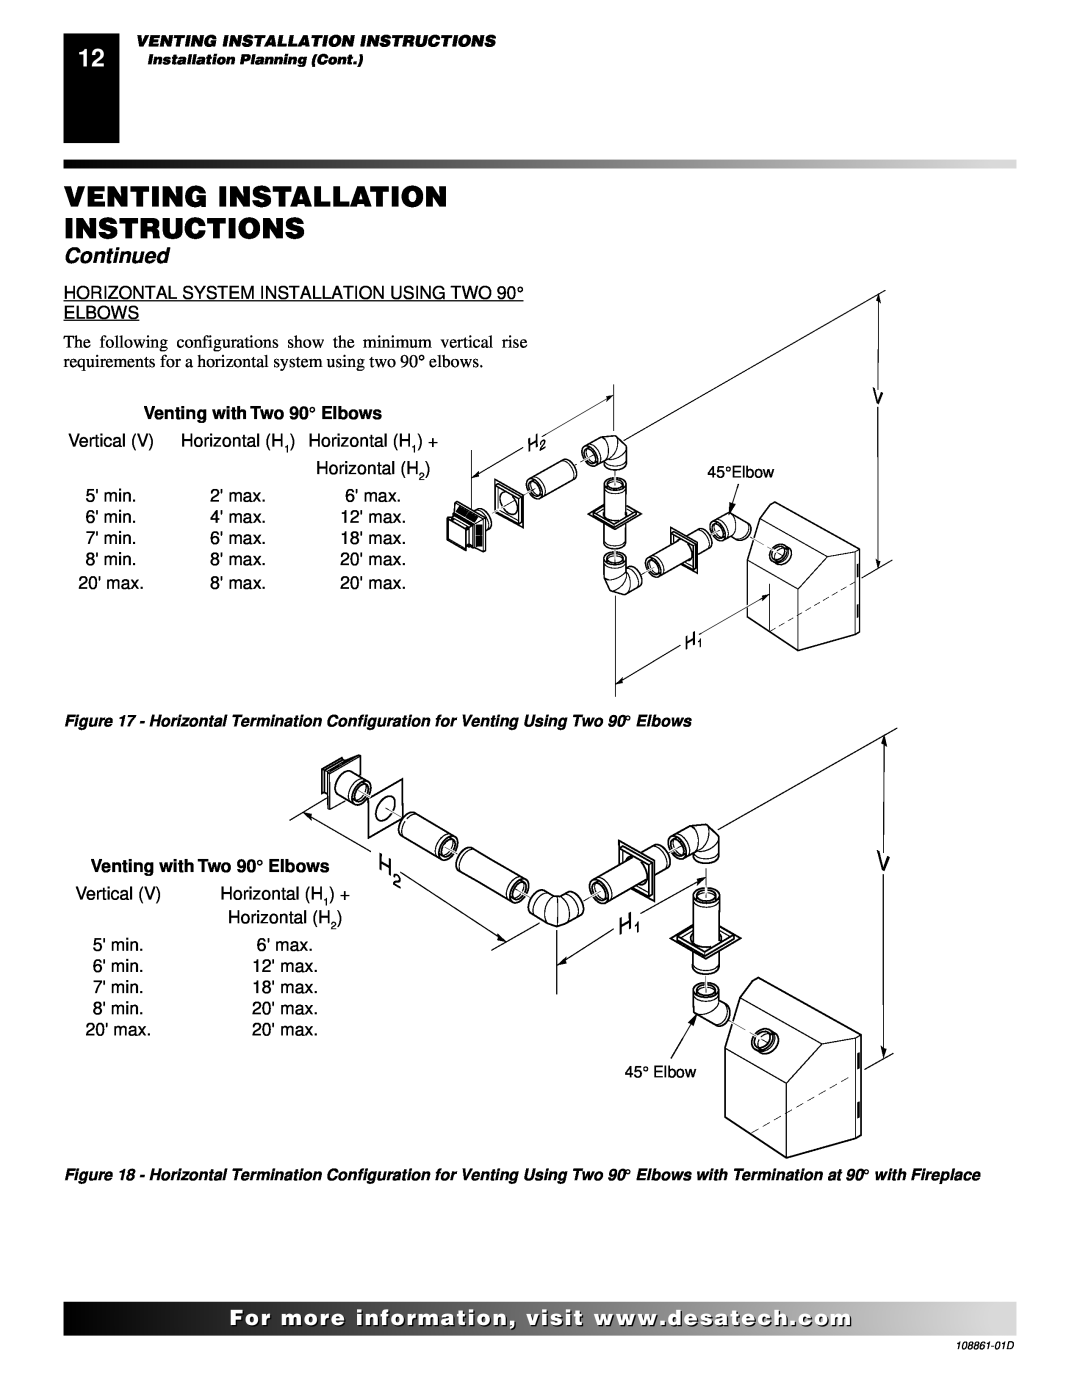 Desa (V)V36P, (V)V42P, (V)V42N, CHDV36NR, CHDV42NR Venting Installation Instructions, Continued, Venting with Two 90 Elbows 